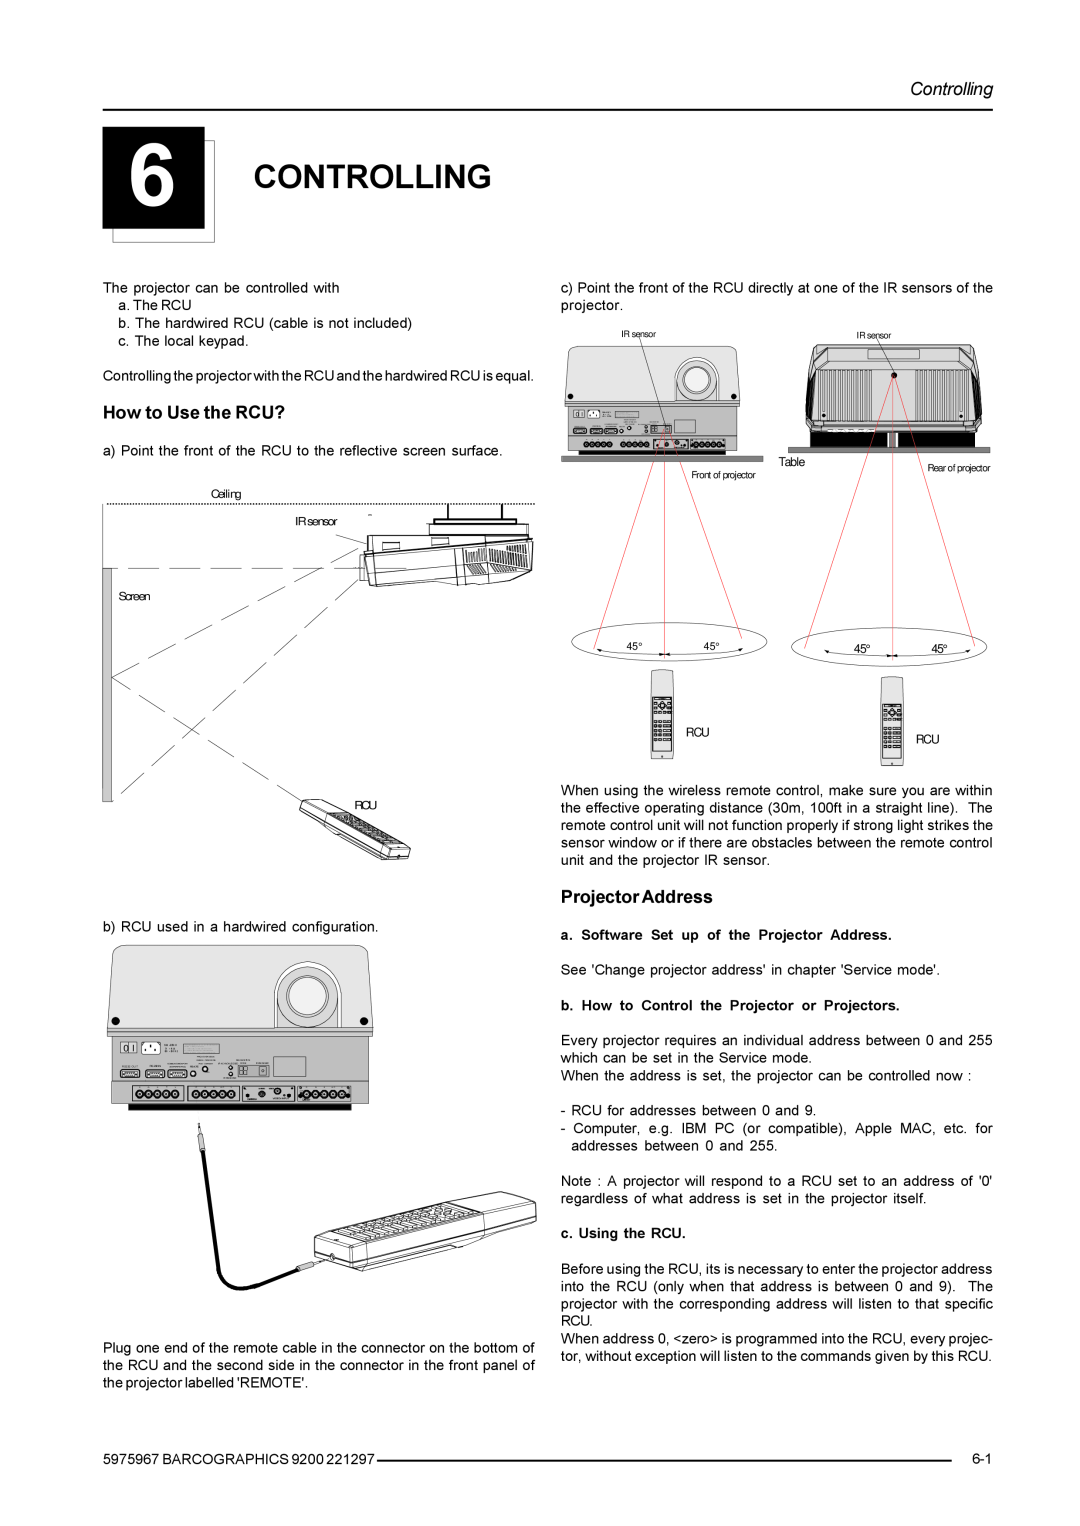 Barco 9200 owner manual Controlling, How to Use the RCU?, Projector Address 